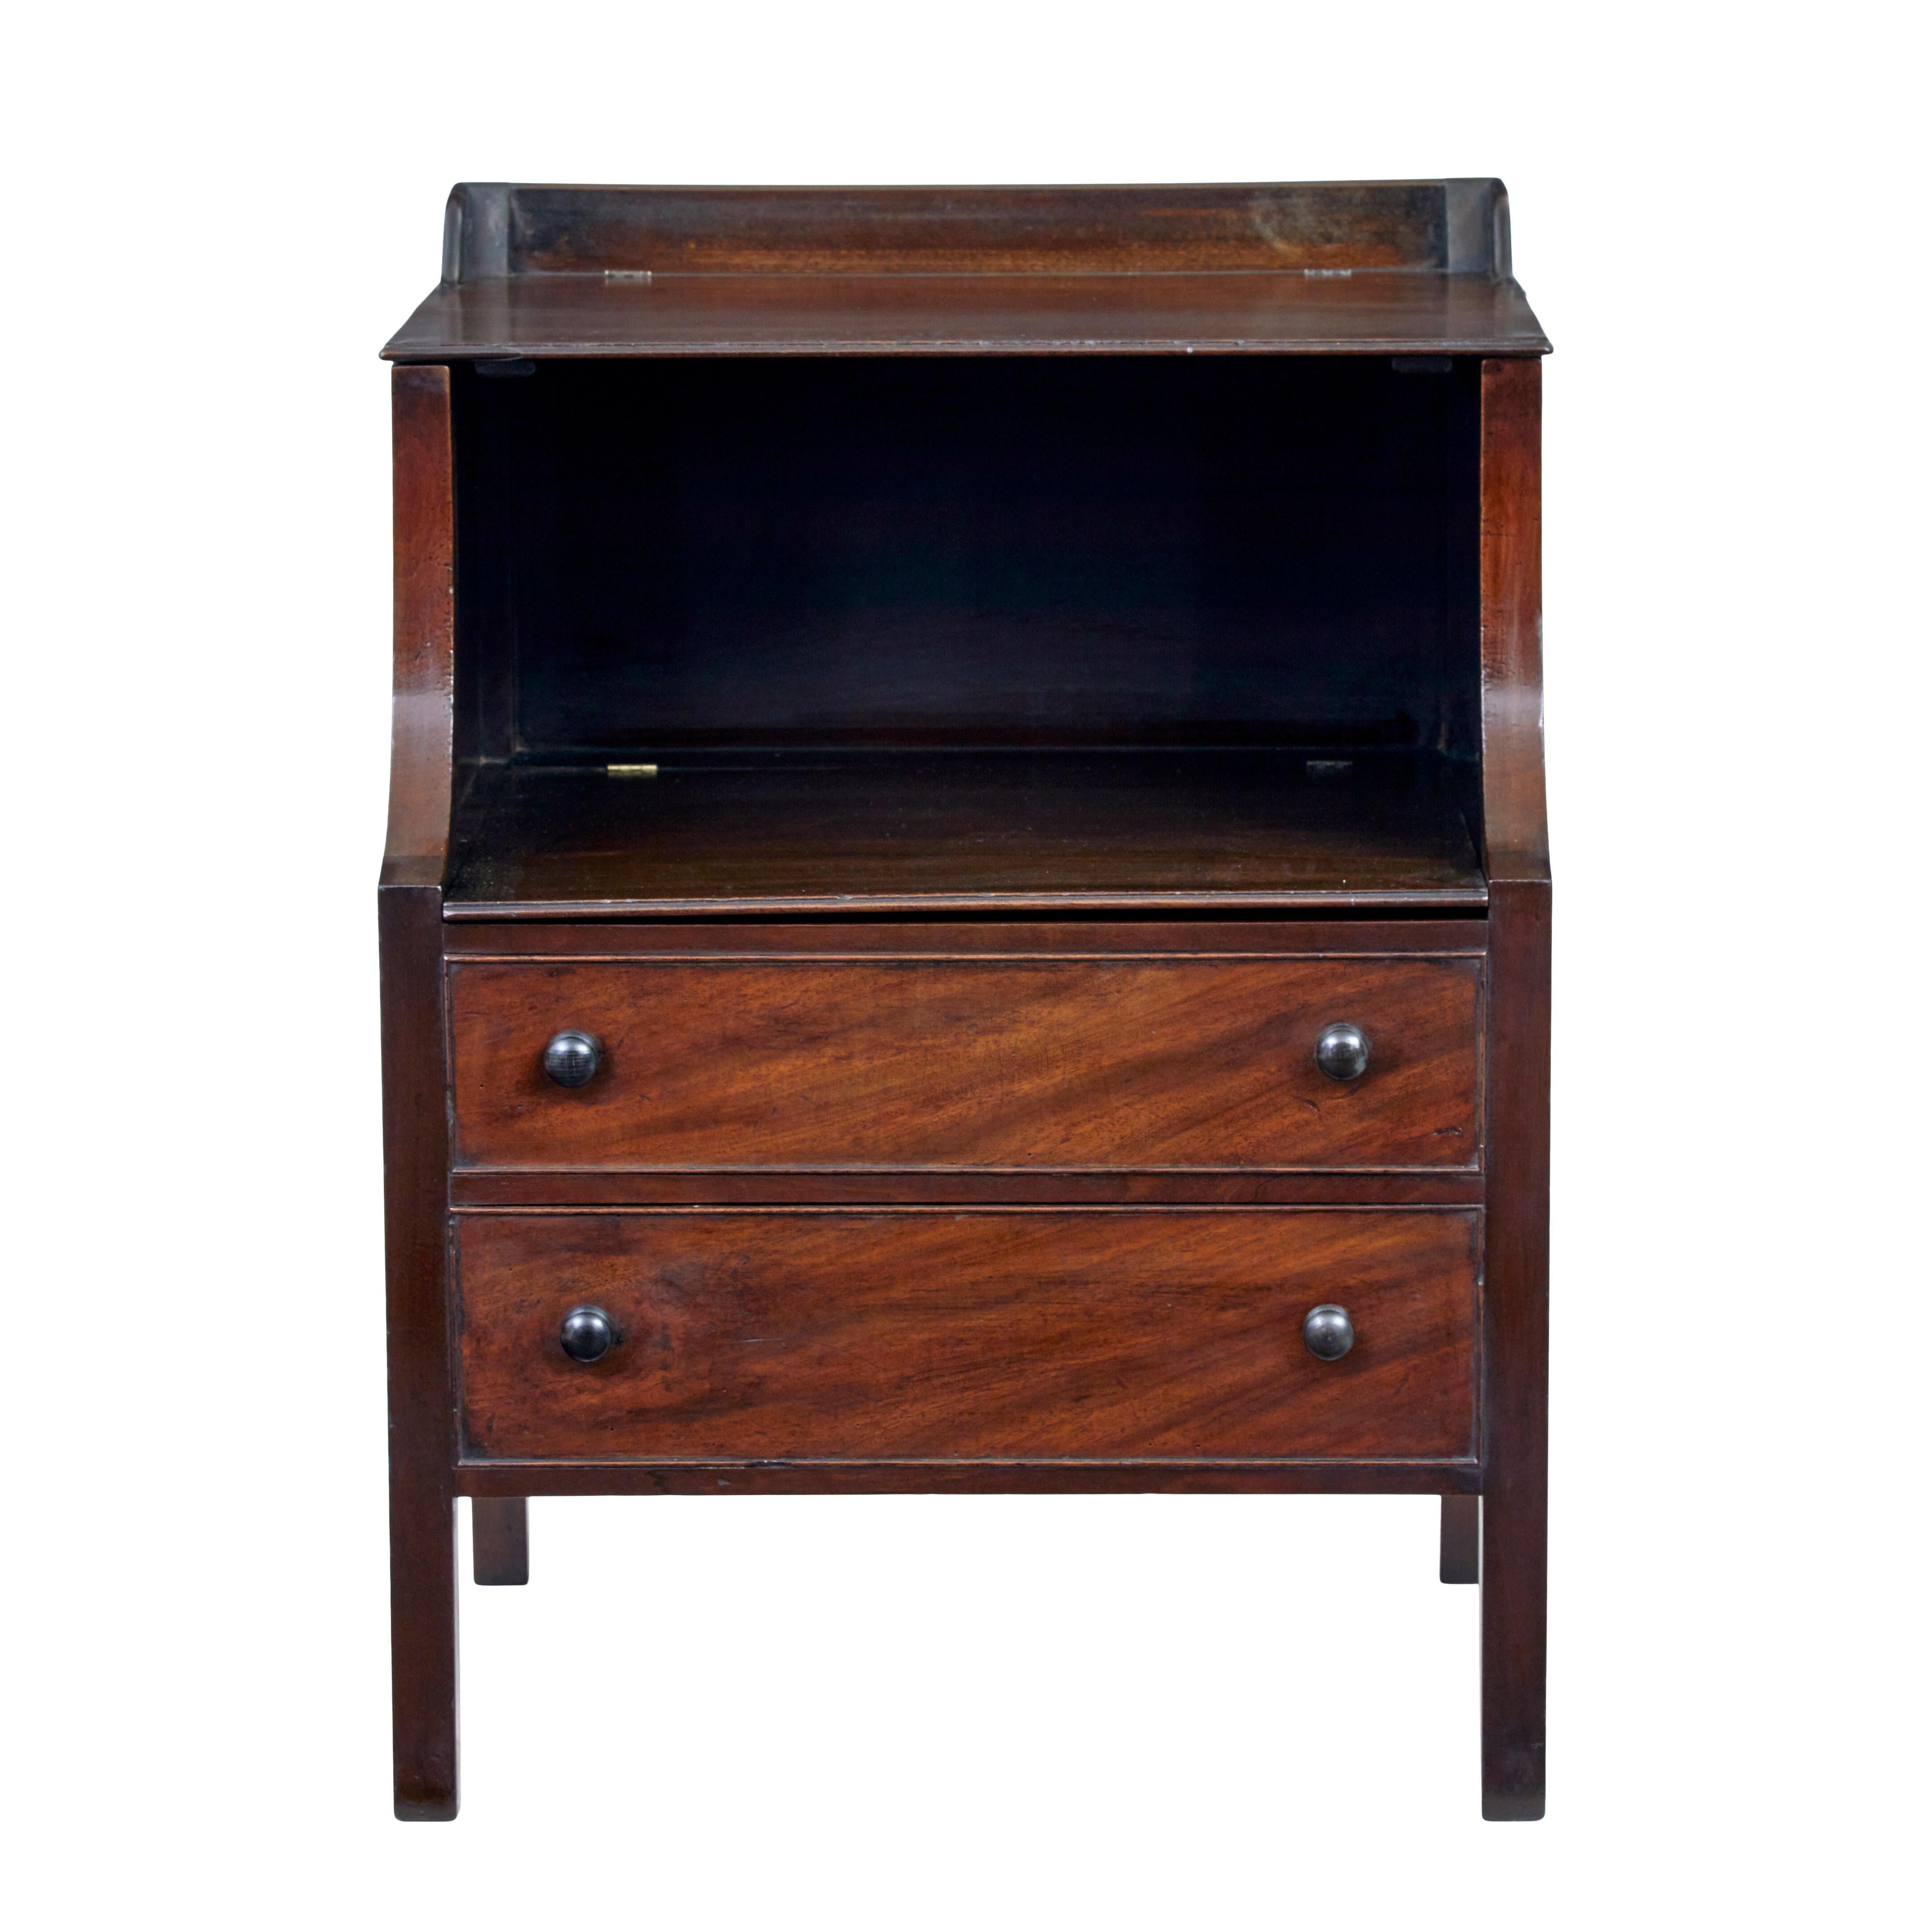 18th century Georgian mahogany bedside commode circa 1770.

Good colour and patina from this now obsolete piece of furniture.  Hinged shelf with 2 dummy drawers to the front.  Further hinged surface lifts up to the reveal the bowl.

Good example of